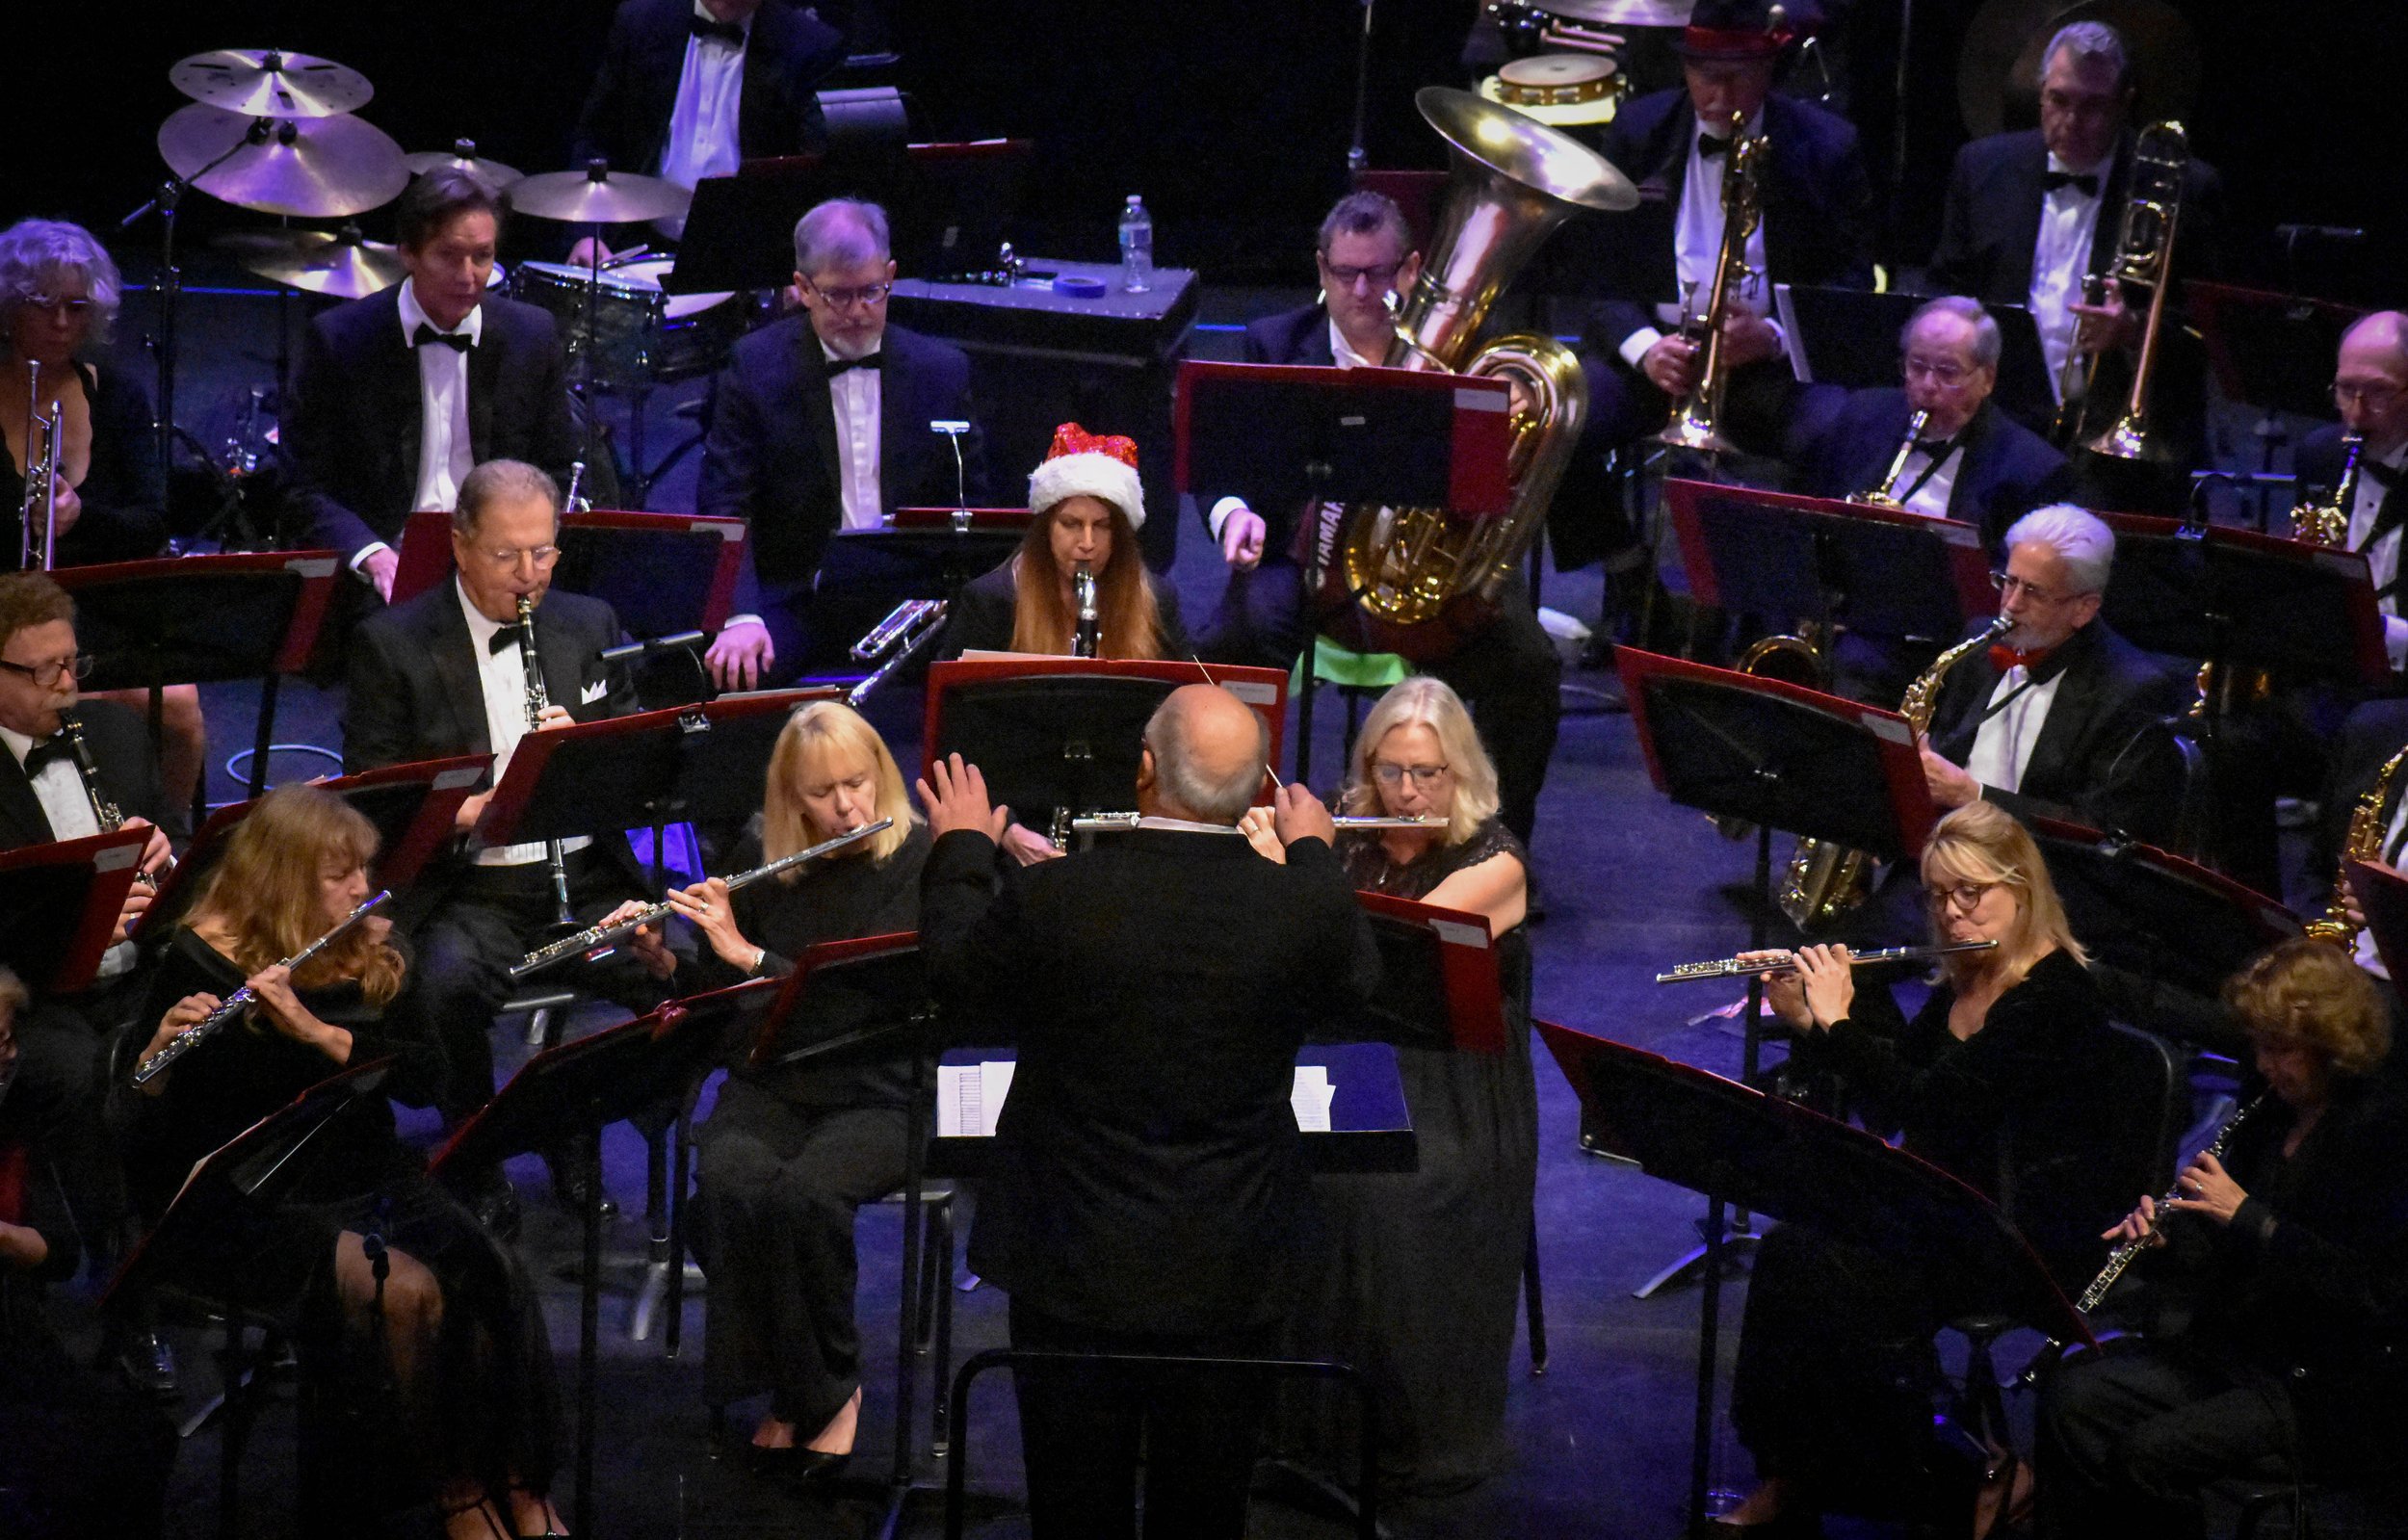 12-19-2021 LCB Holiday Concert by Peyton Webster64-23.jpg